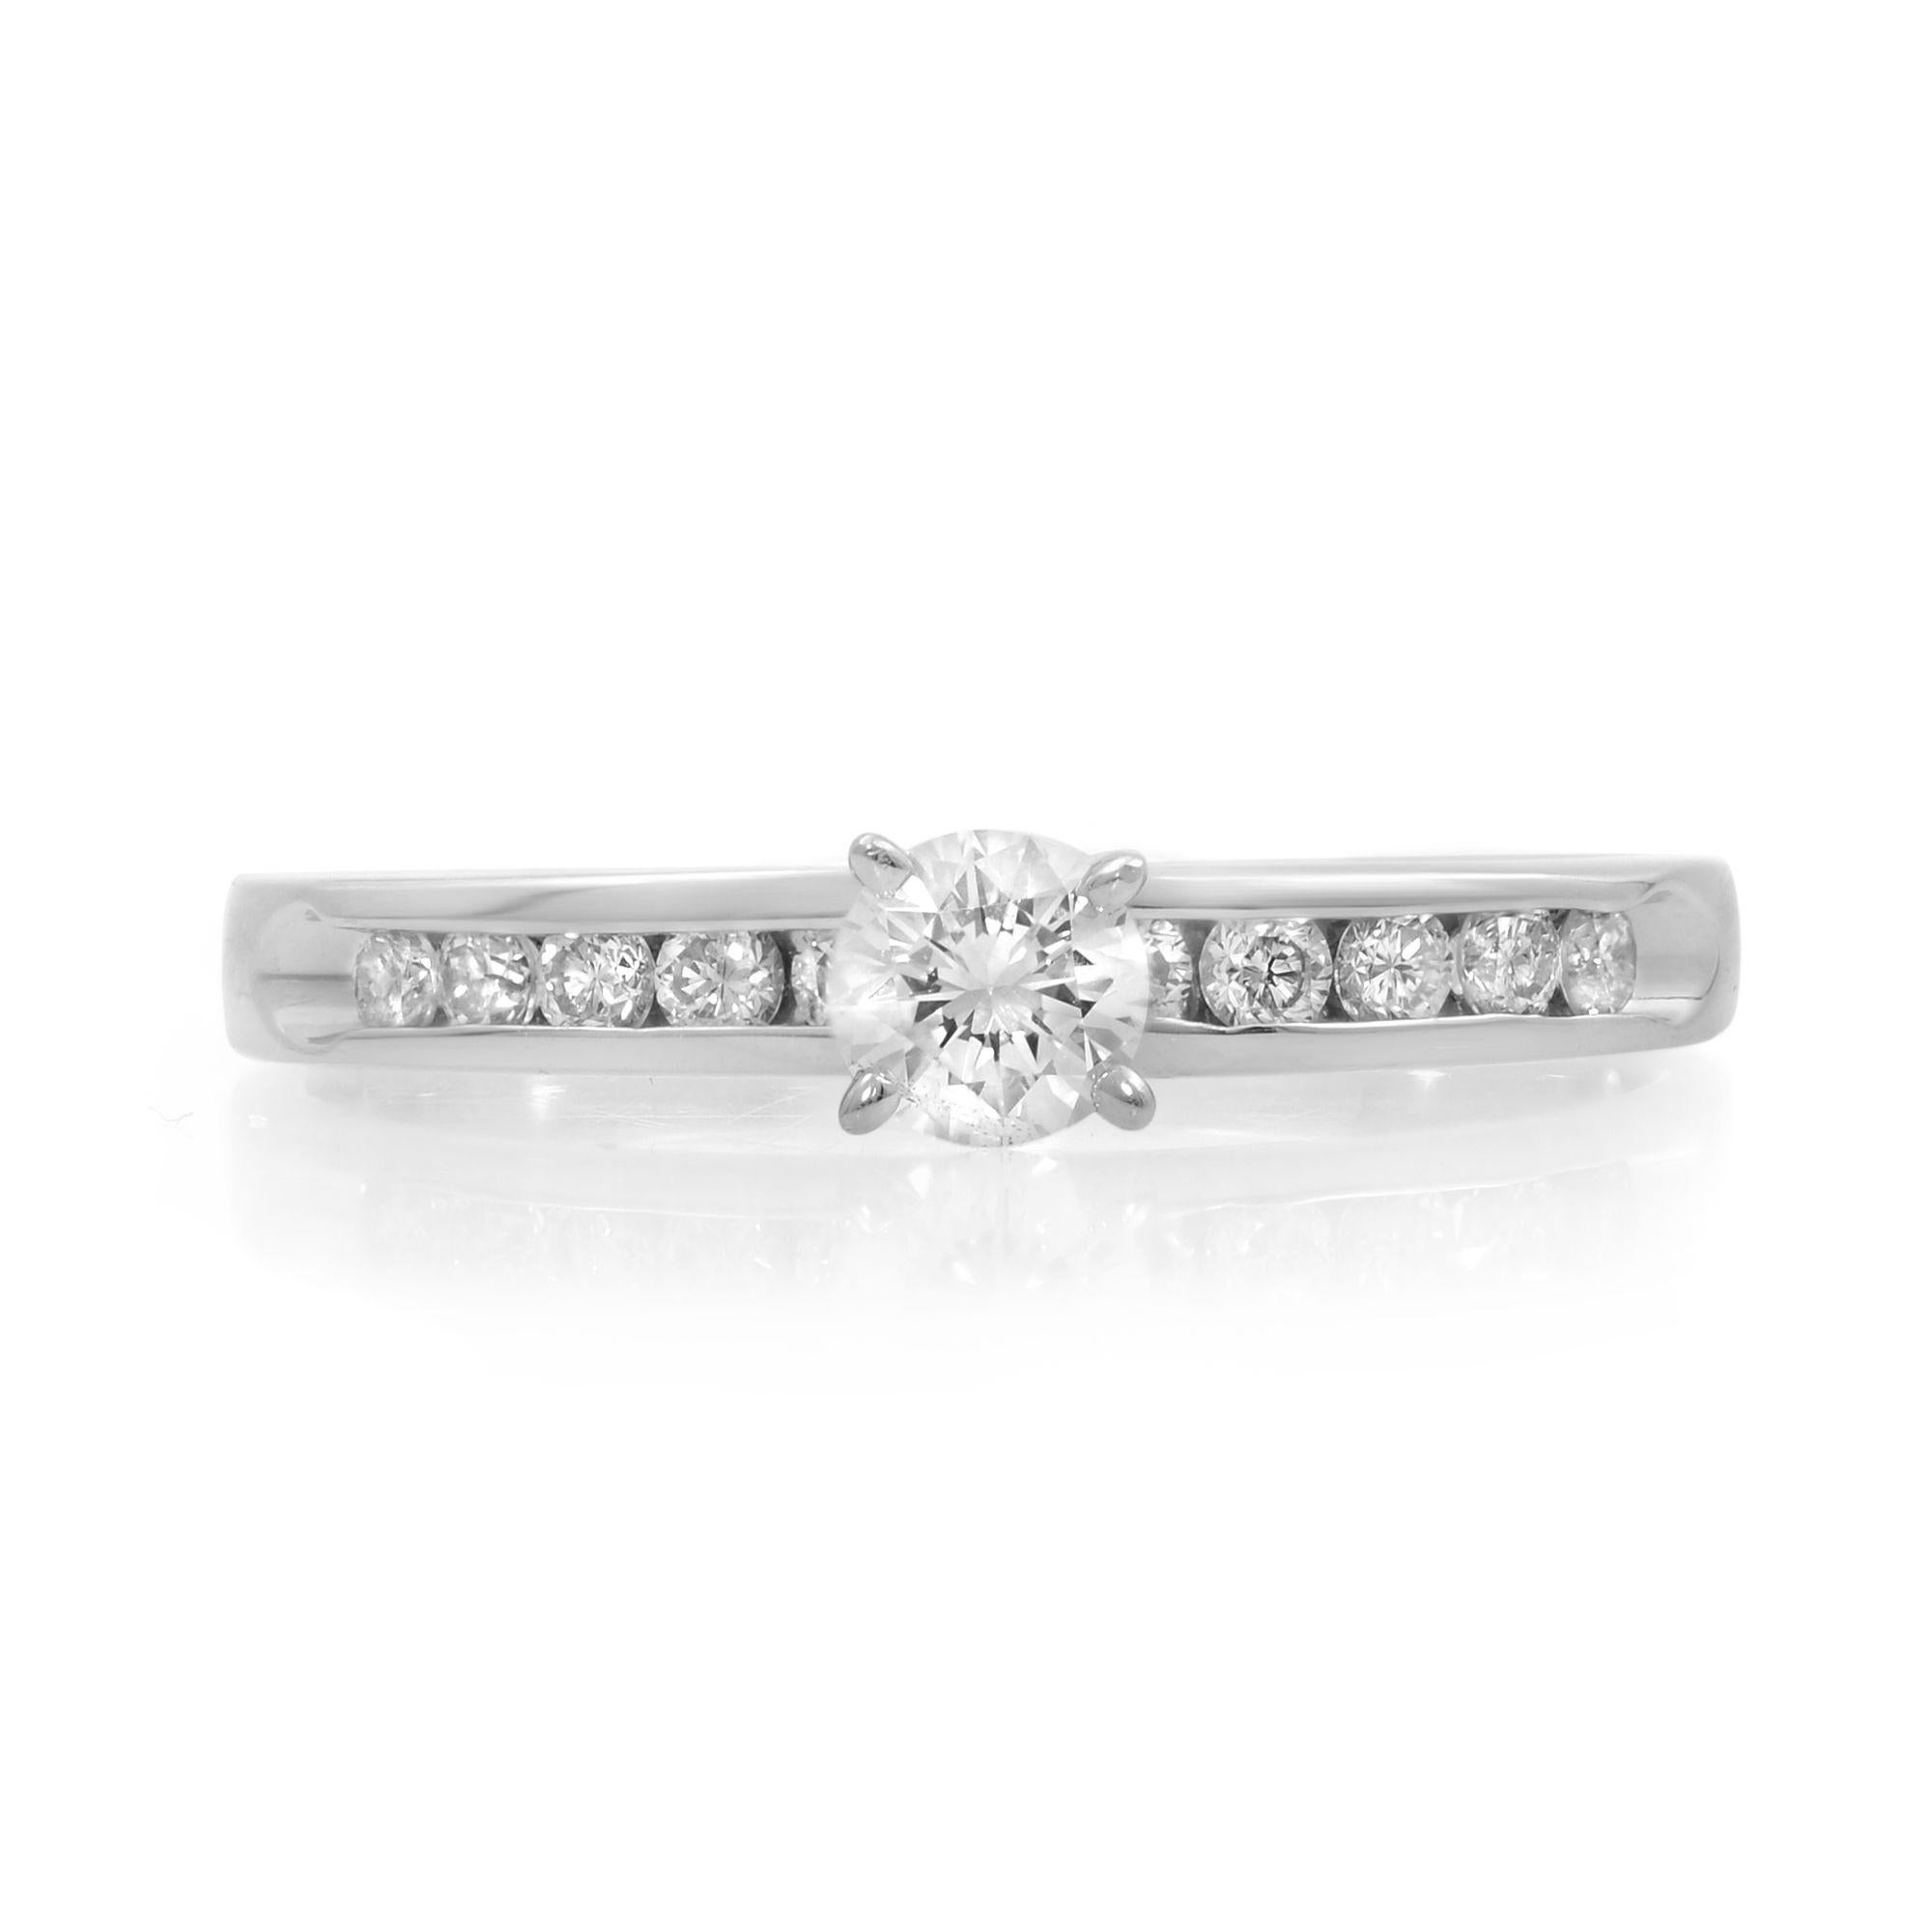 This simple engagement ring features a round cut 0.20 carat diamond solitaire, showing brilliance and sophistication. Its radiant platinum shank is embellished with channel-set diamond accents to add more beauty. It is crafted in platinum. Total